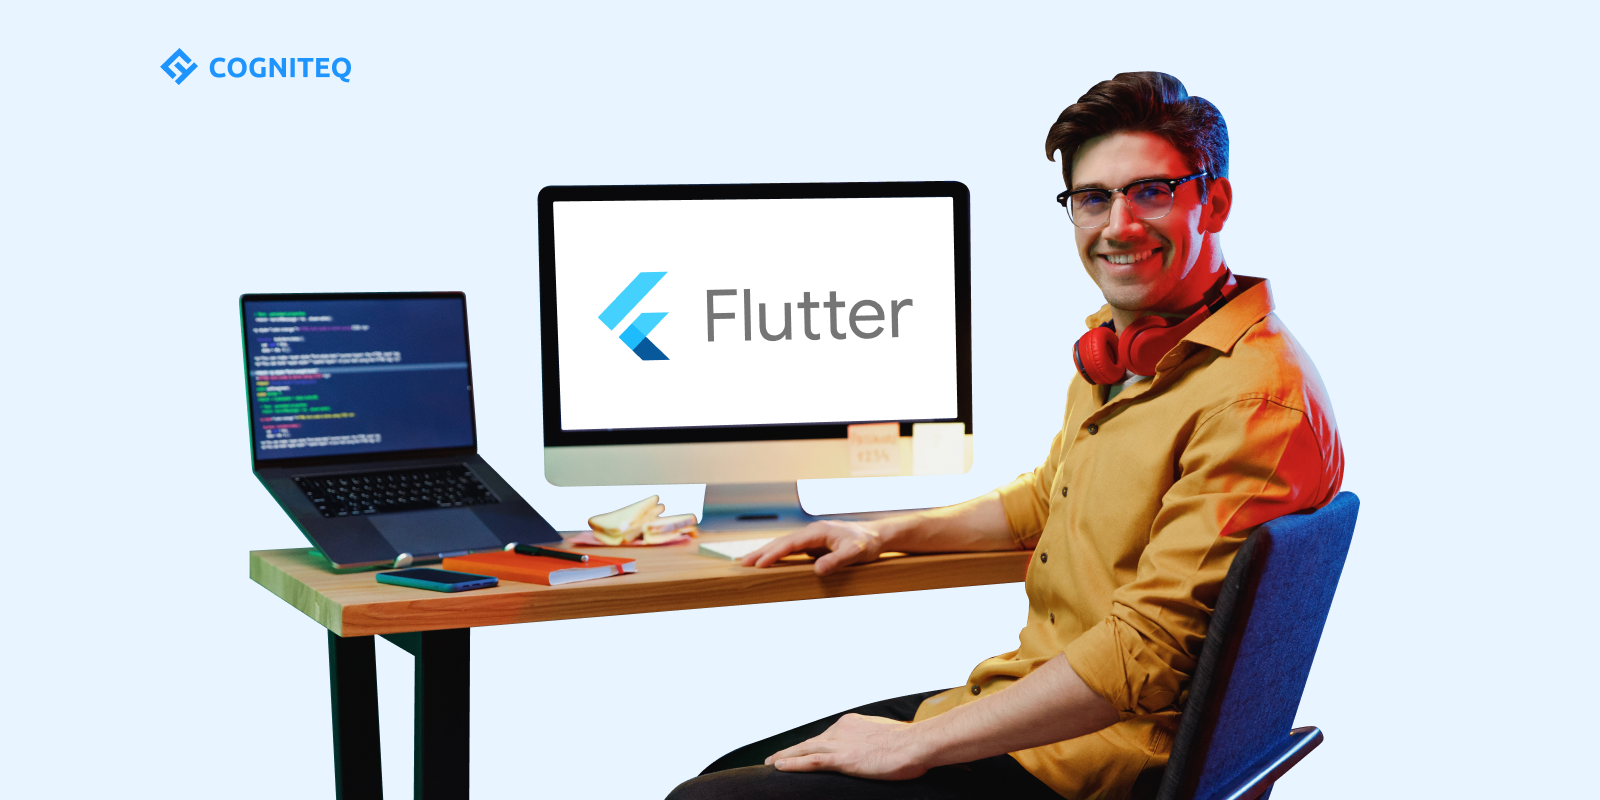 Flutter pros and cons